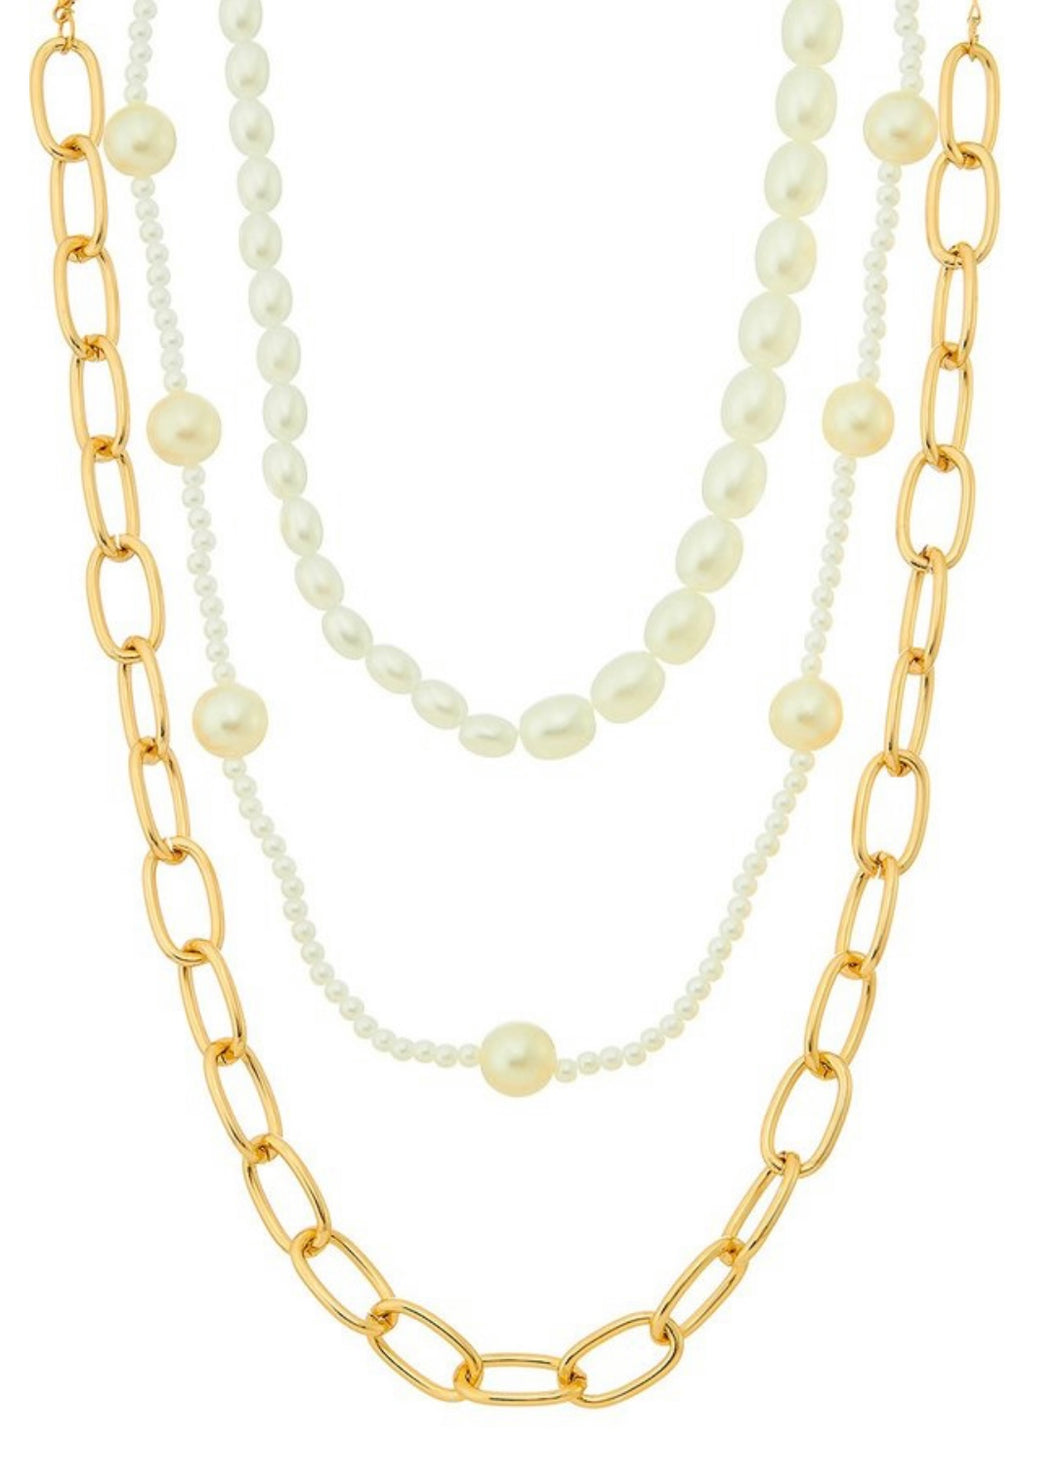 3 Piece Pearl Chain Necklace